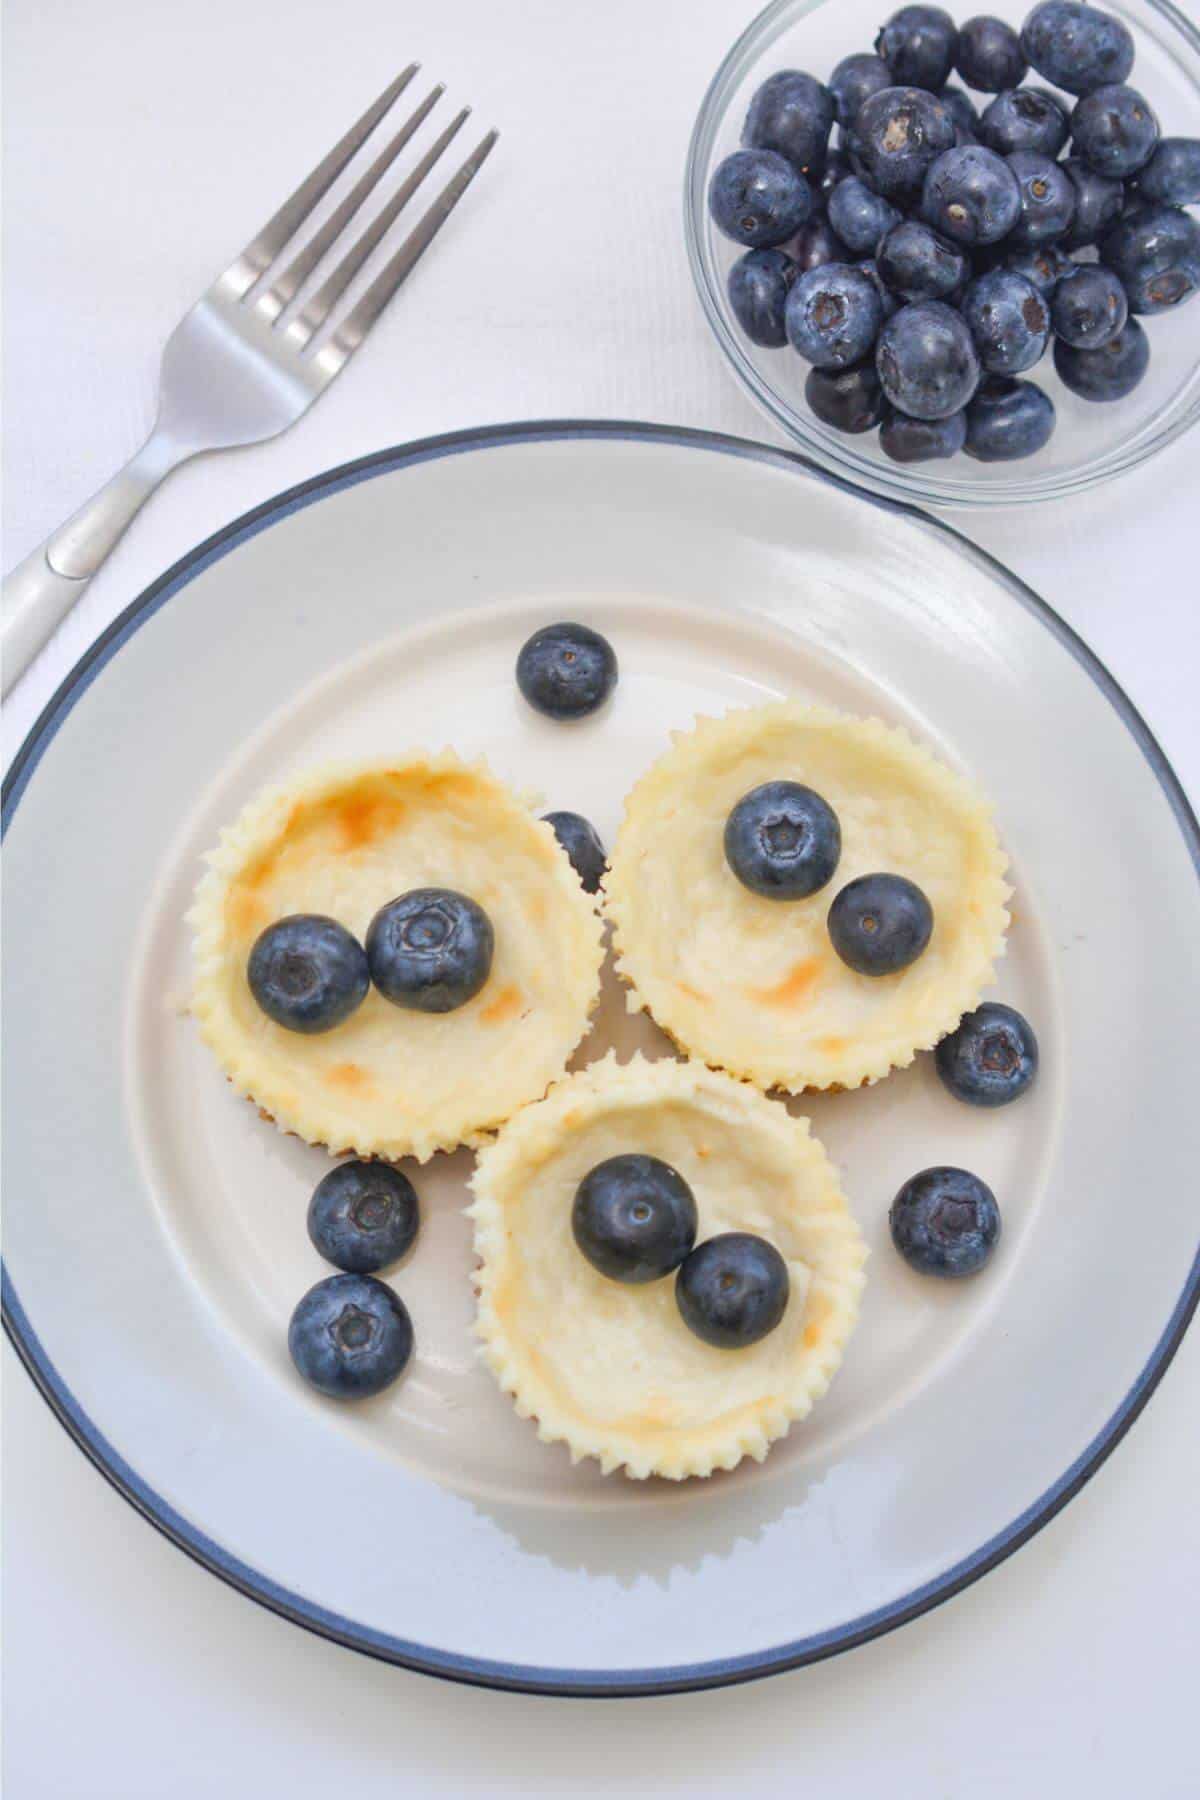 Overhead view of mini vegan cheesecakes on plate with fork and blueberries.